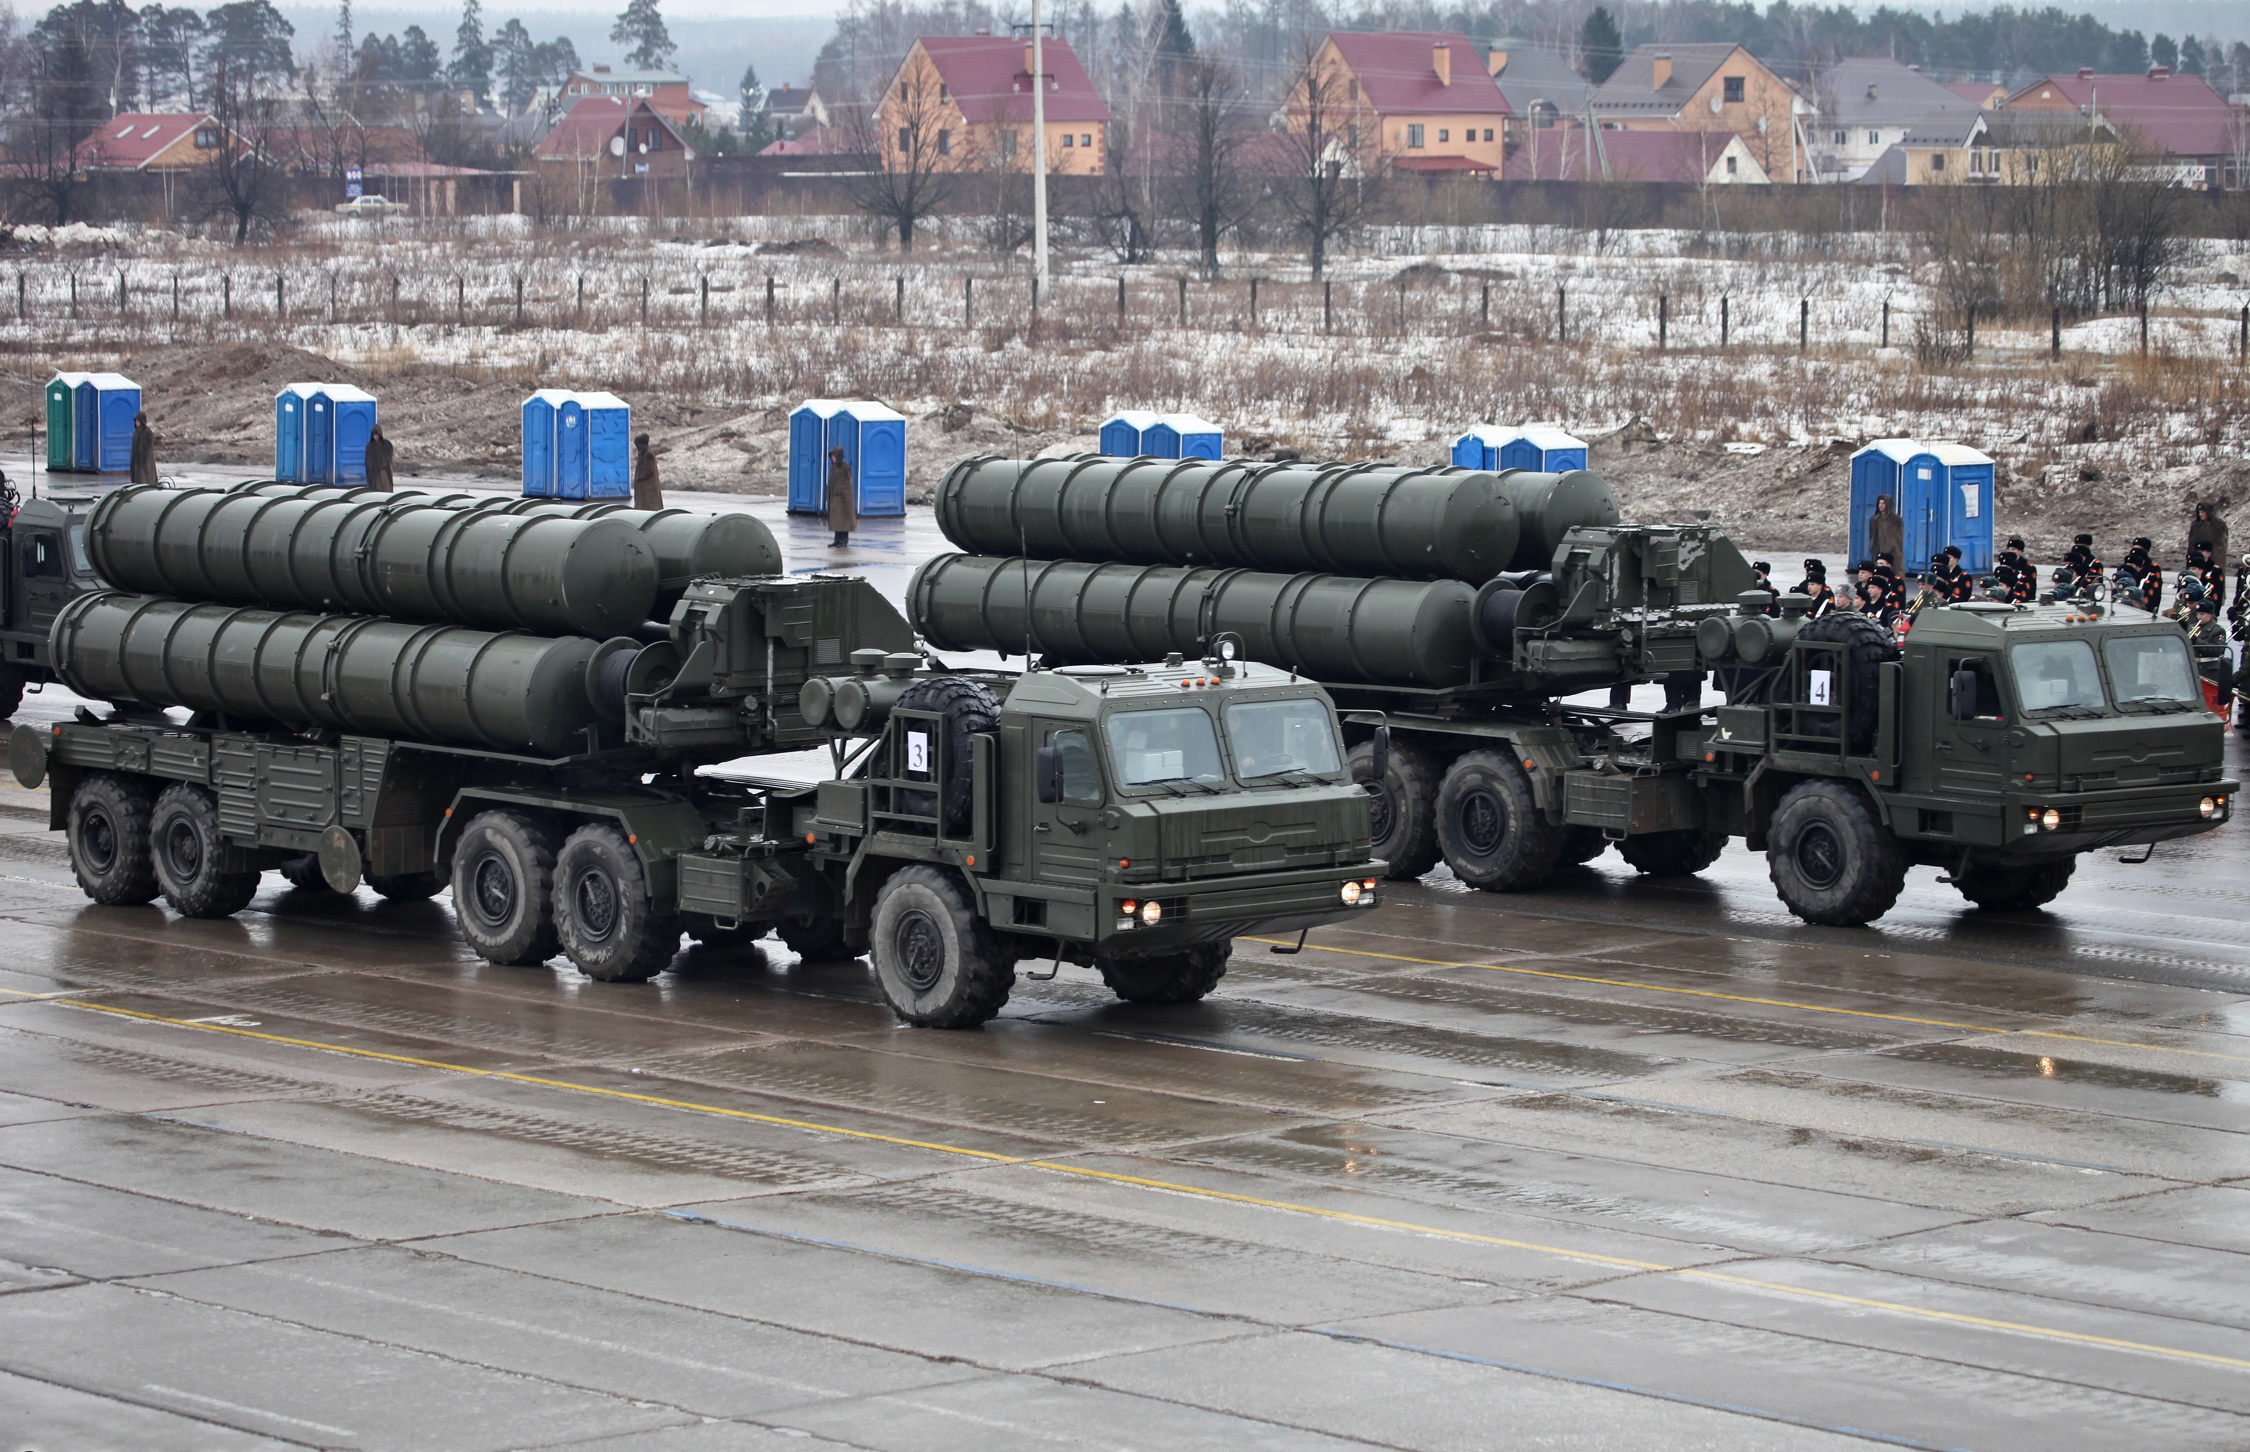 Saudi Arabia Threatens Military Action if Qatar Purchases Russian S-400 Air Defense System